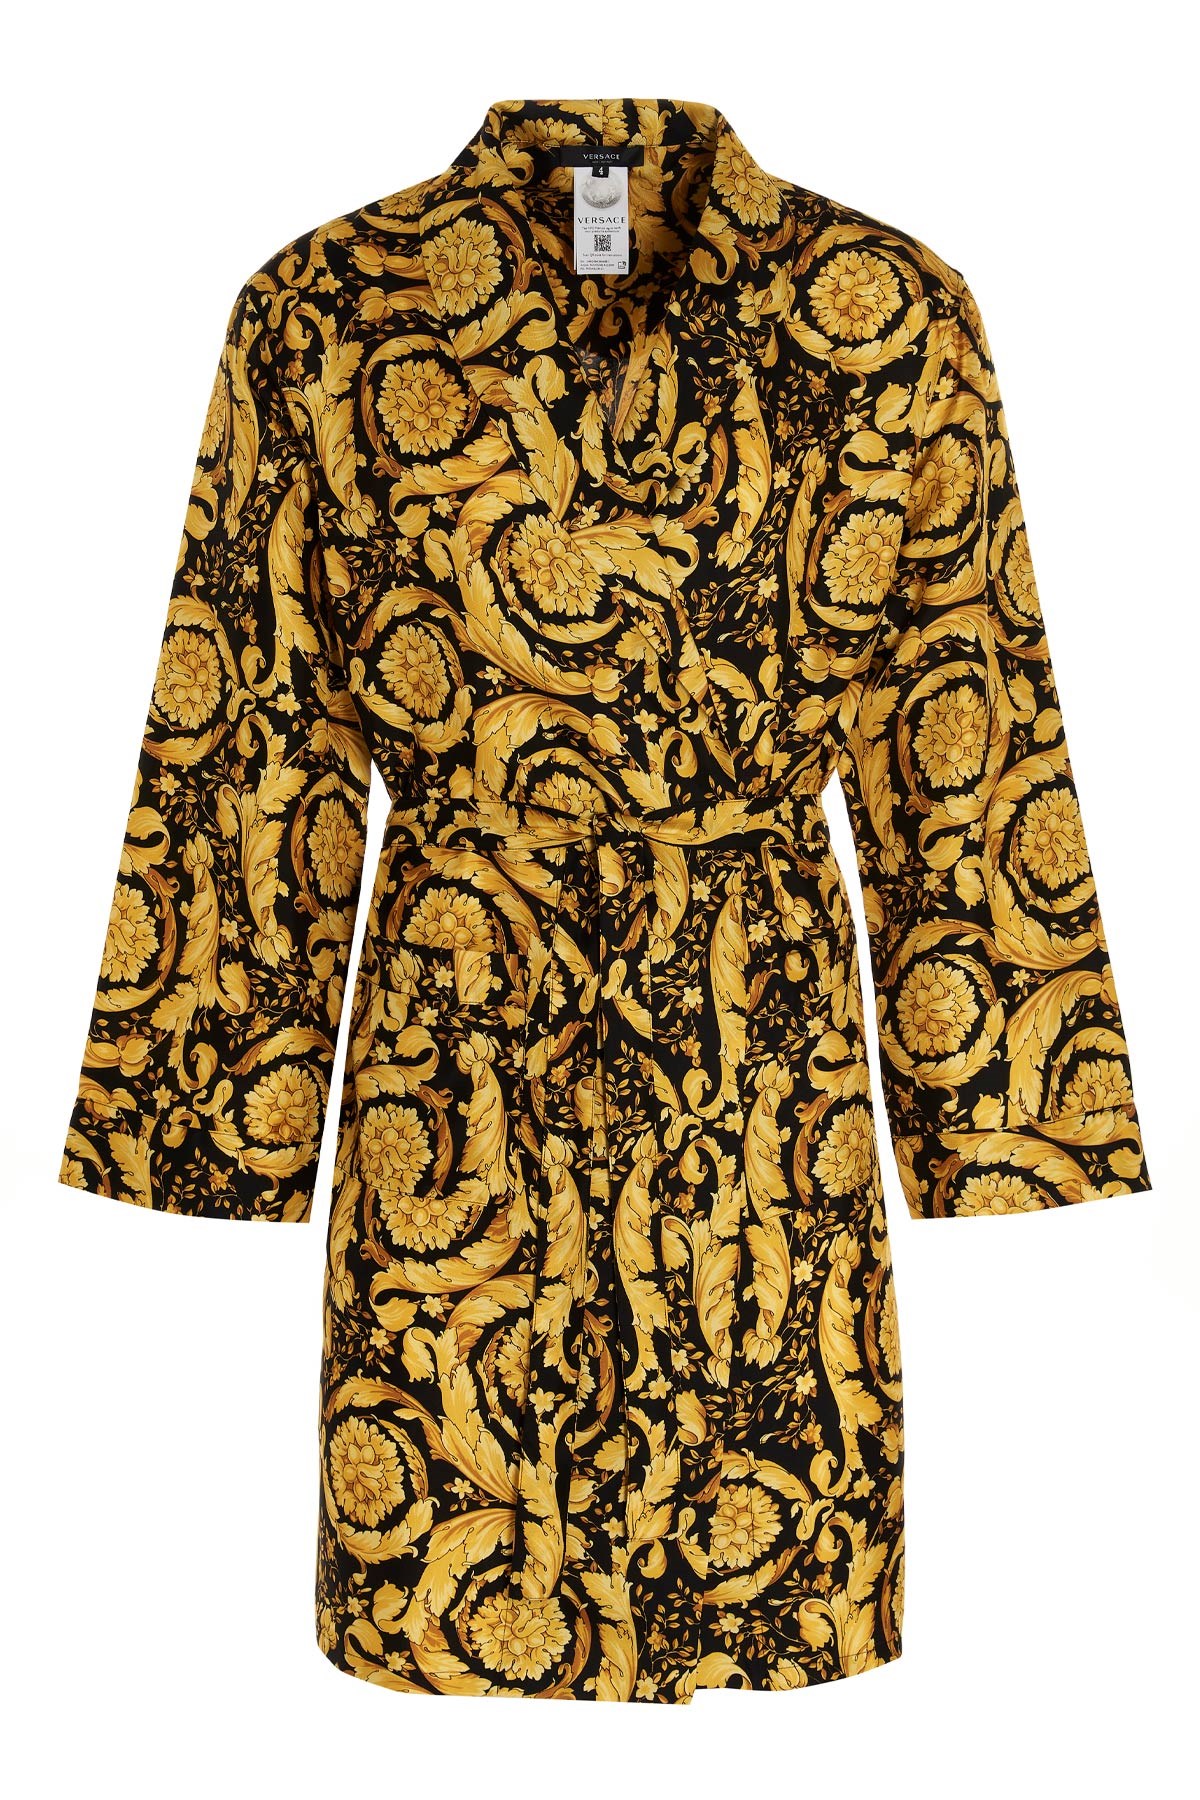 VERSACE 'Barocco Ss92’ Silk Dressing Gown